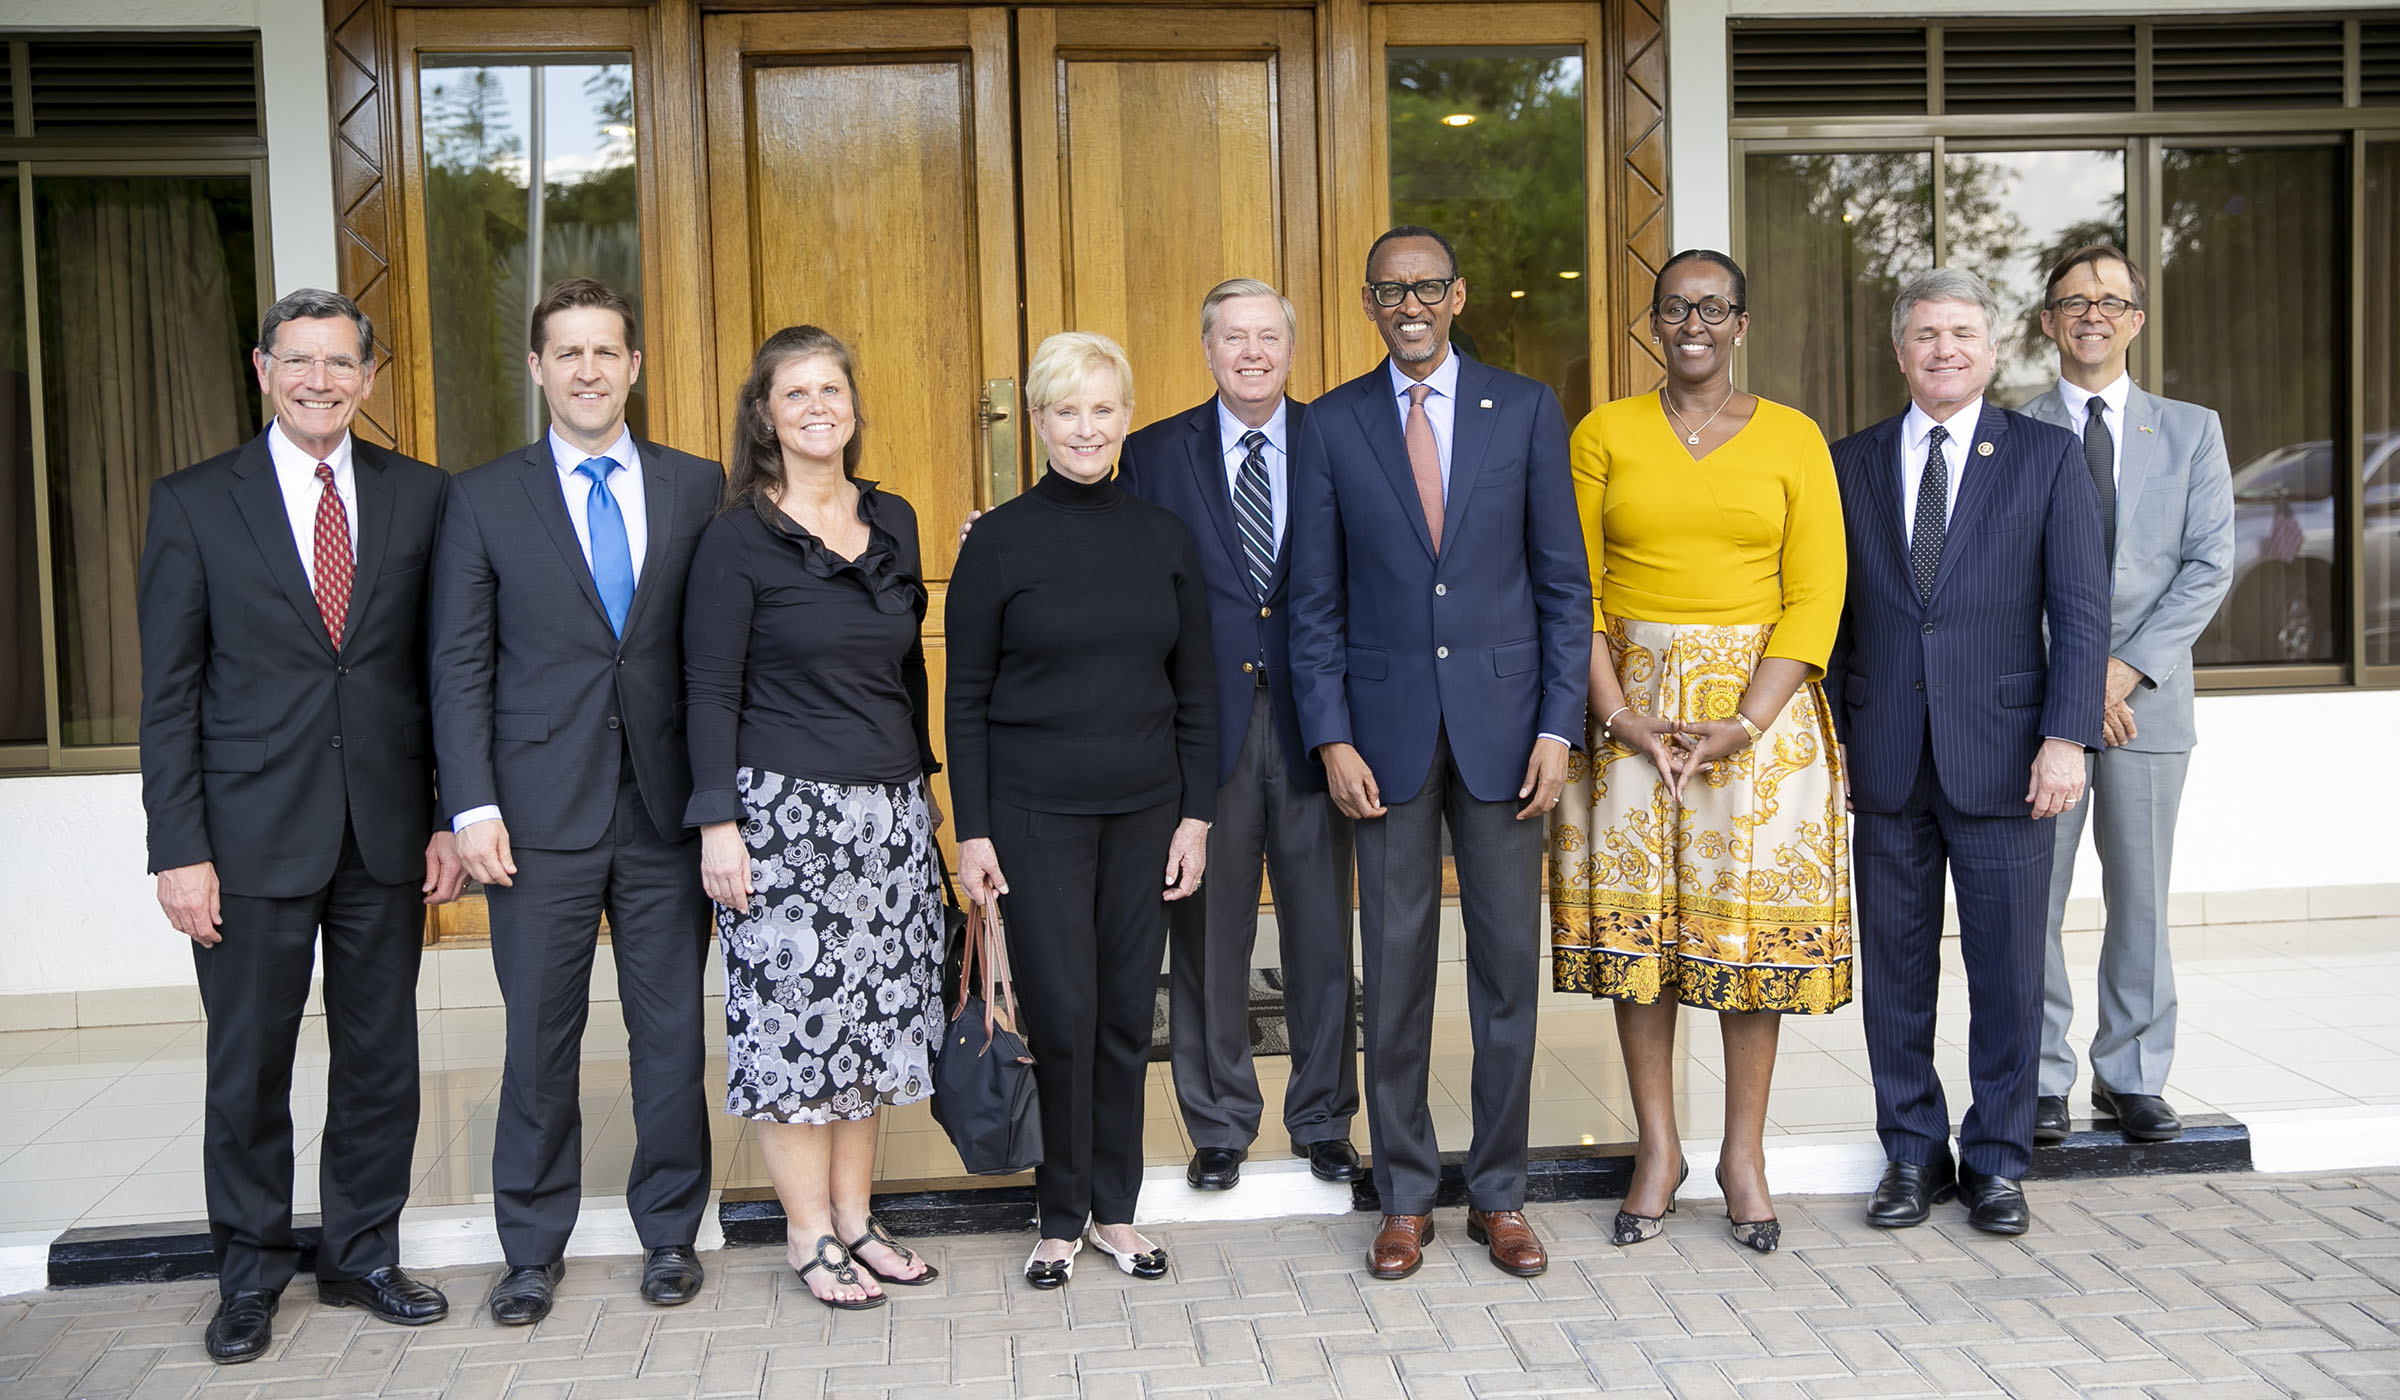 President Paul Kagame and First Lady Jeannette Kagame yesterday hosted a US Congressional delegation to a luncheon at Village Urugwiro. The delegation included Senators Lindsey Graham, Chris Coons, Ben Sasse and John Barrasso. It also included Congressmen Michael McCaul and Cindy McCain as well as the US Ambassador to Rwanda, Peter Vrooman. Village Urugwiro.